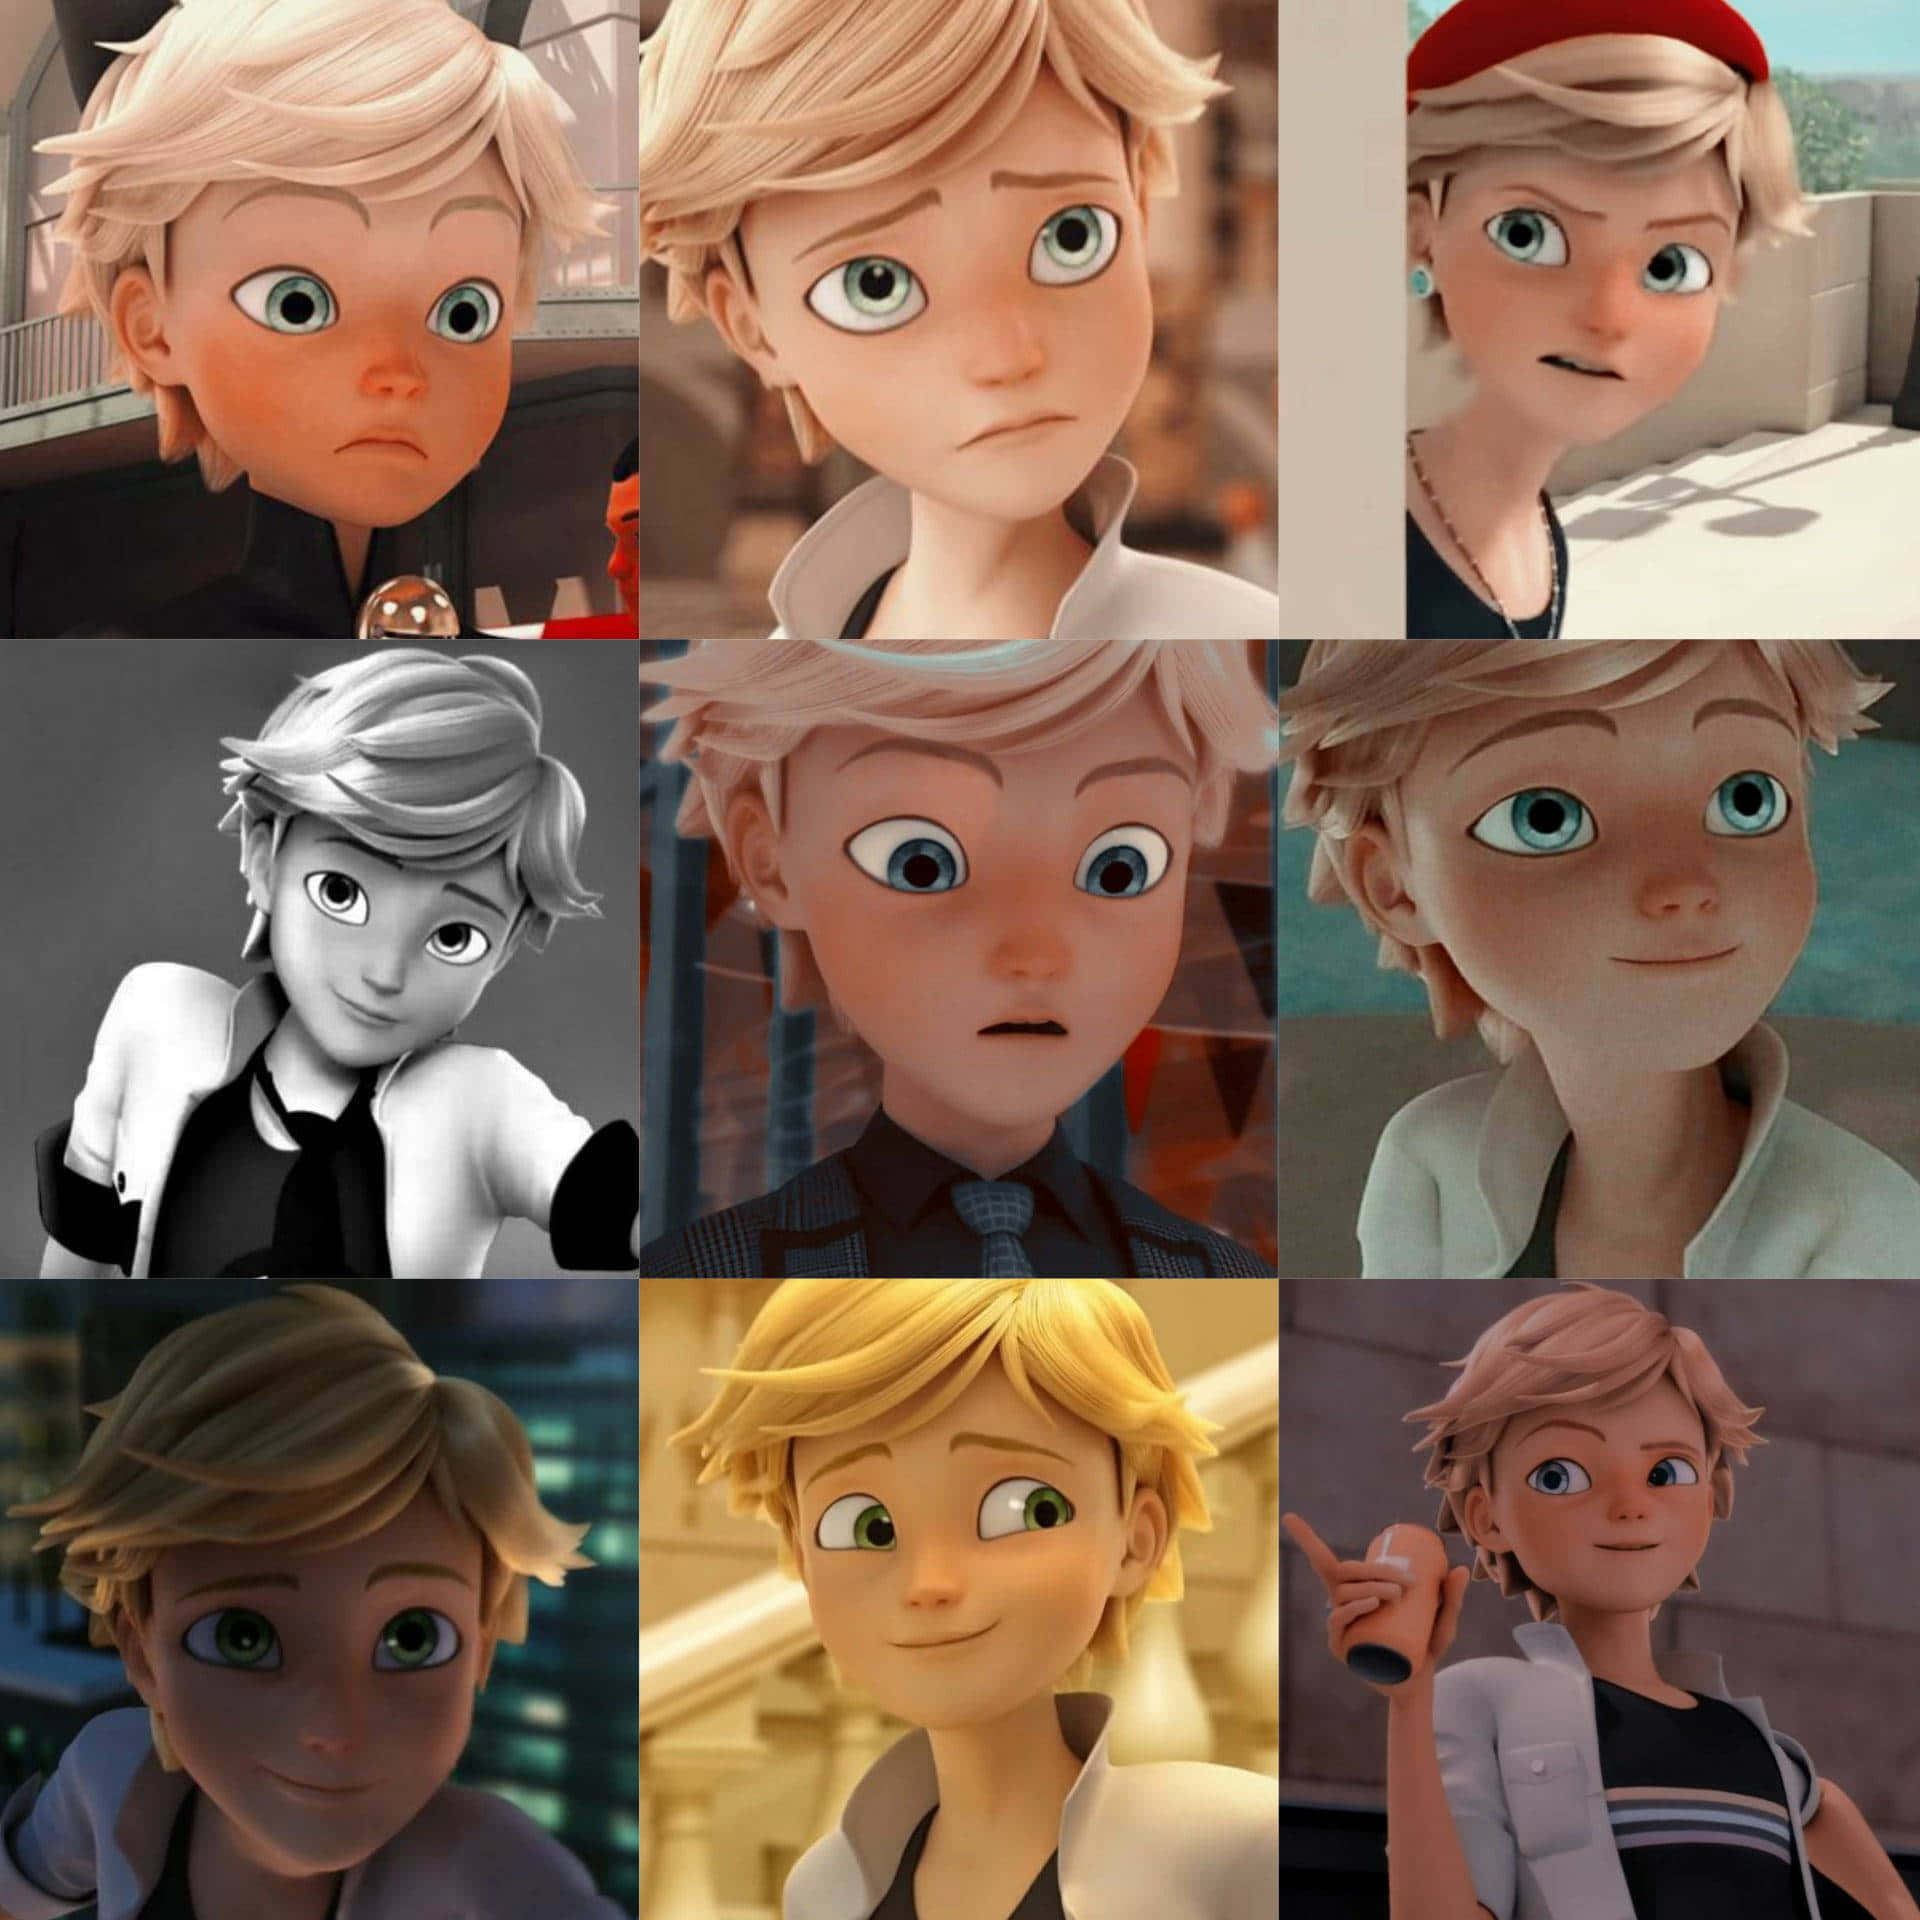 "Let the world know who you really are, Adrien!" Wallpaper